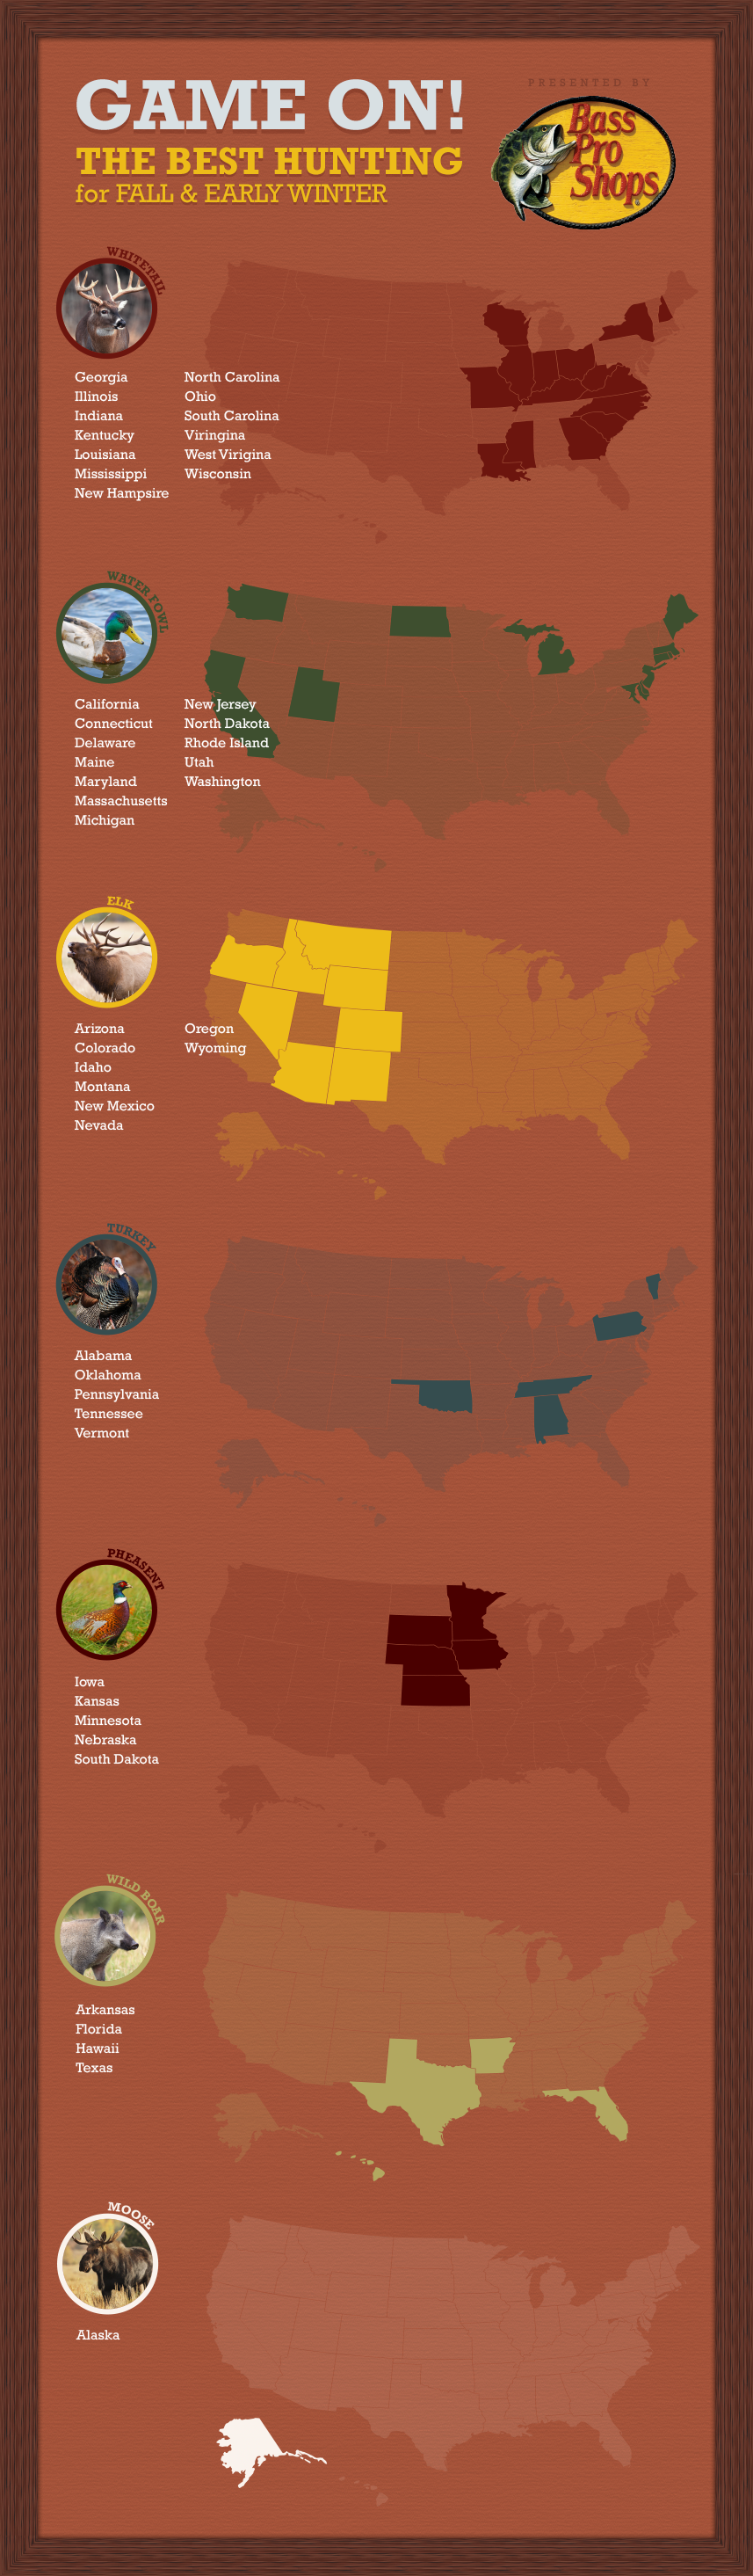 Best Hunting By State Infographic